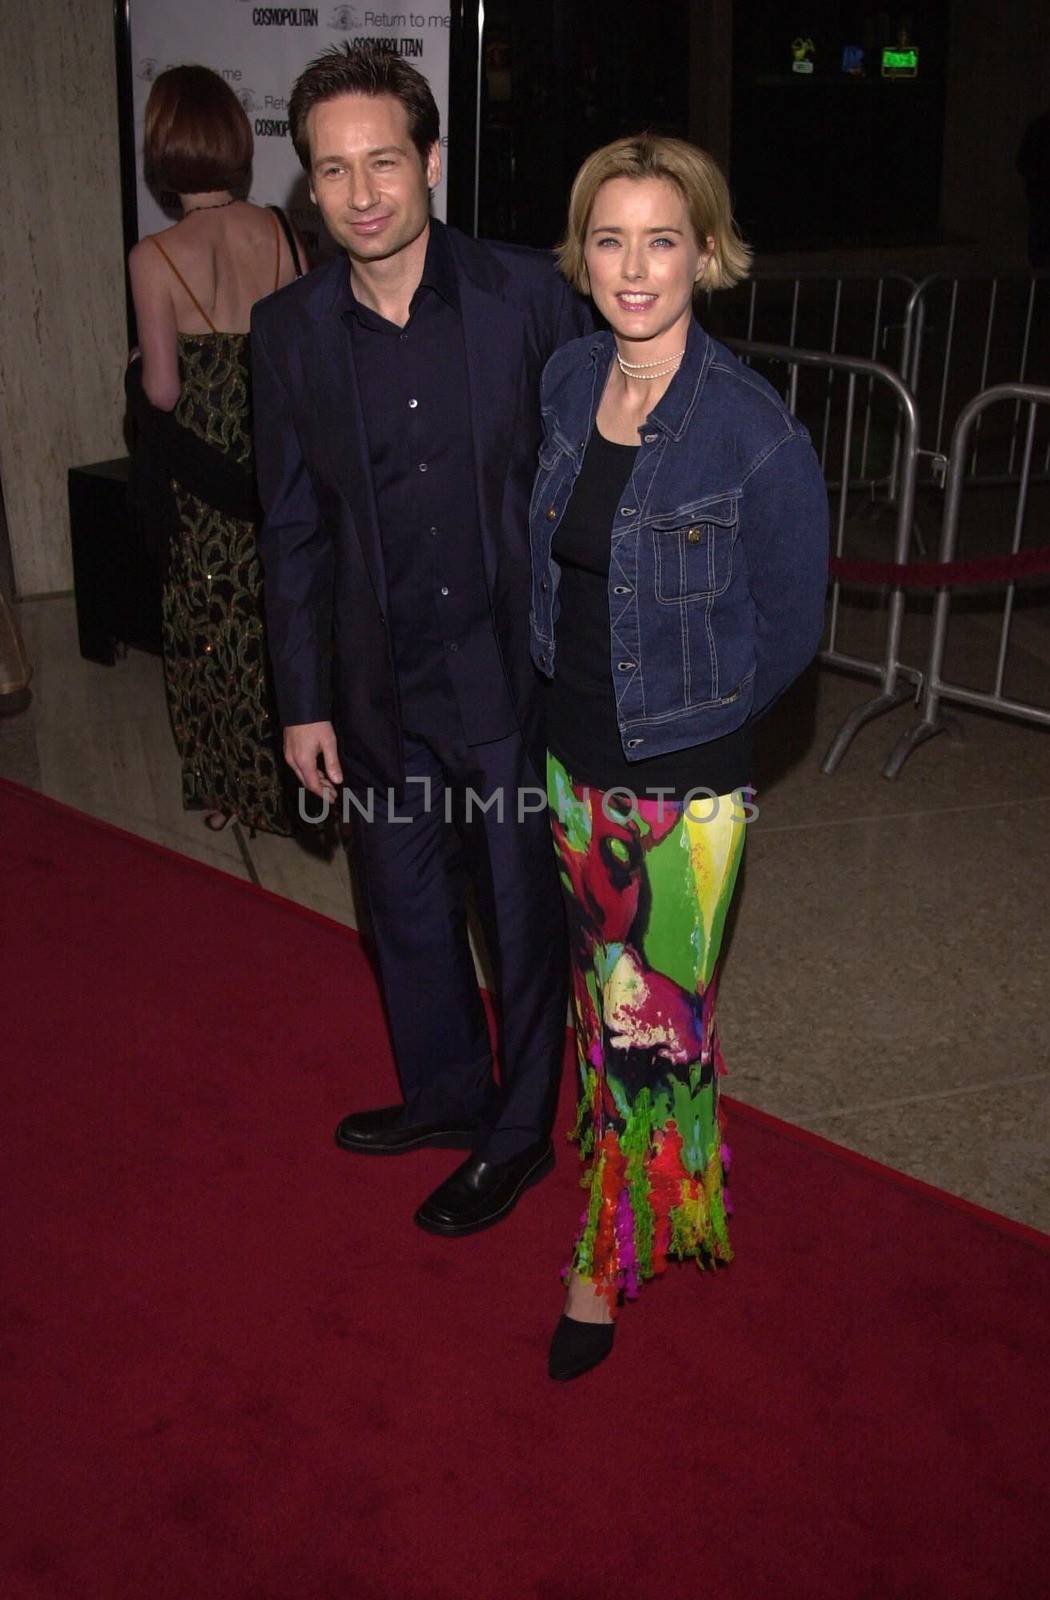 David Duchovny and Tea Leoni at the premiere of MGM's "RETURN TO ME" in Century City, 04-03-00